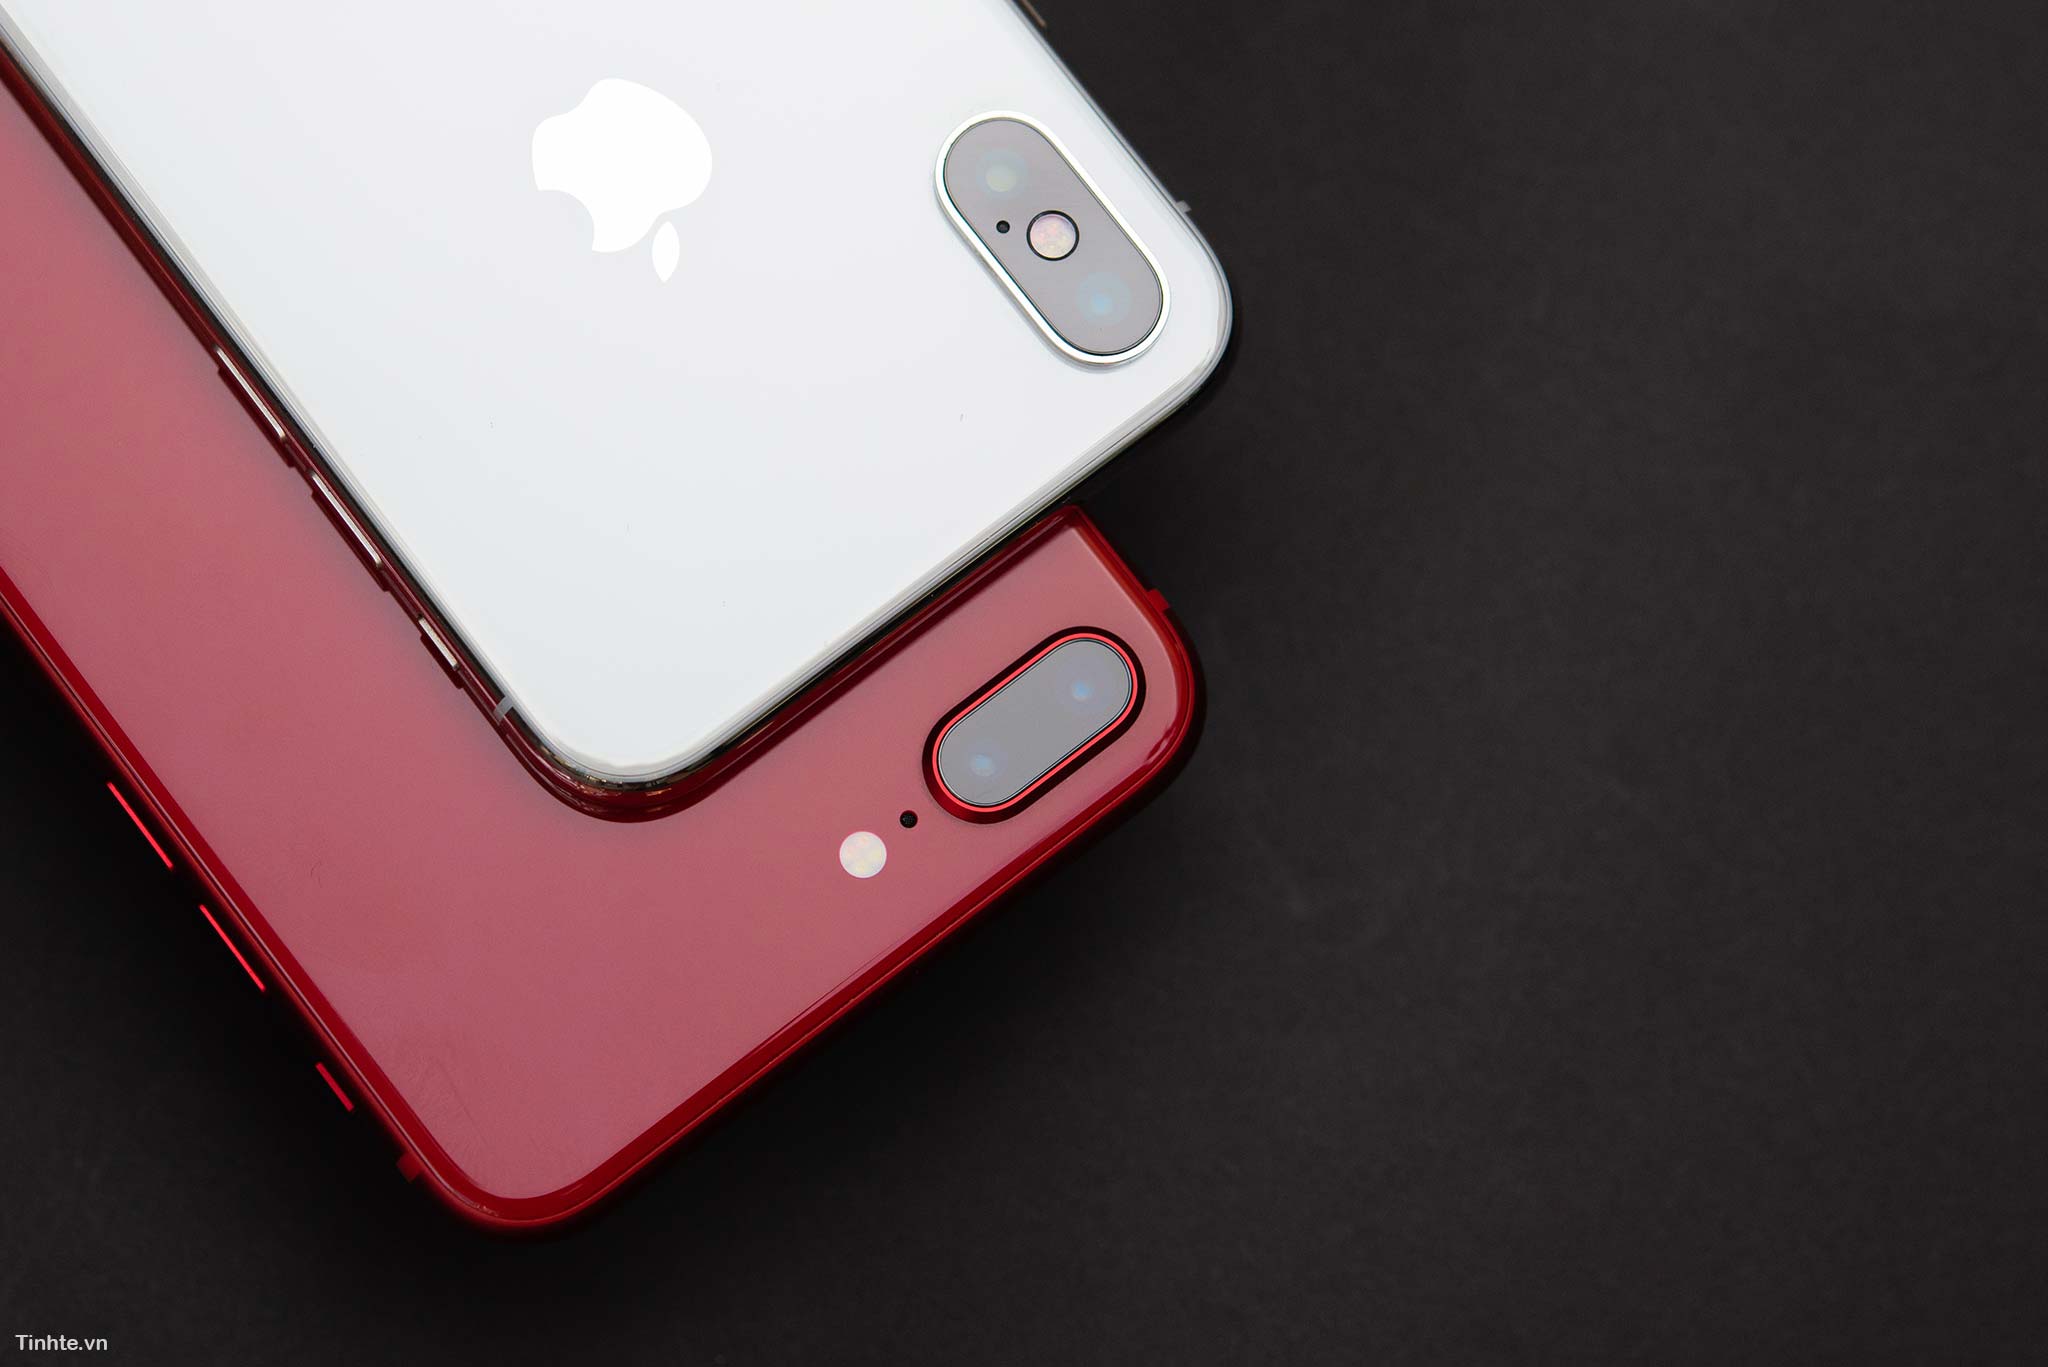 4287411_tinhte_tren_tay_apple_iphone_8_product_red_25.jpg